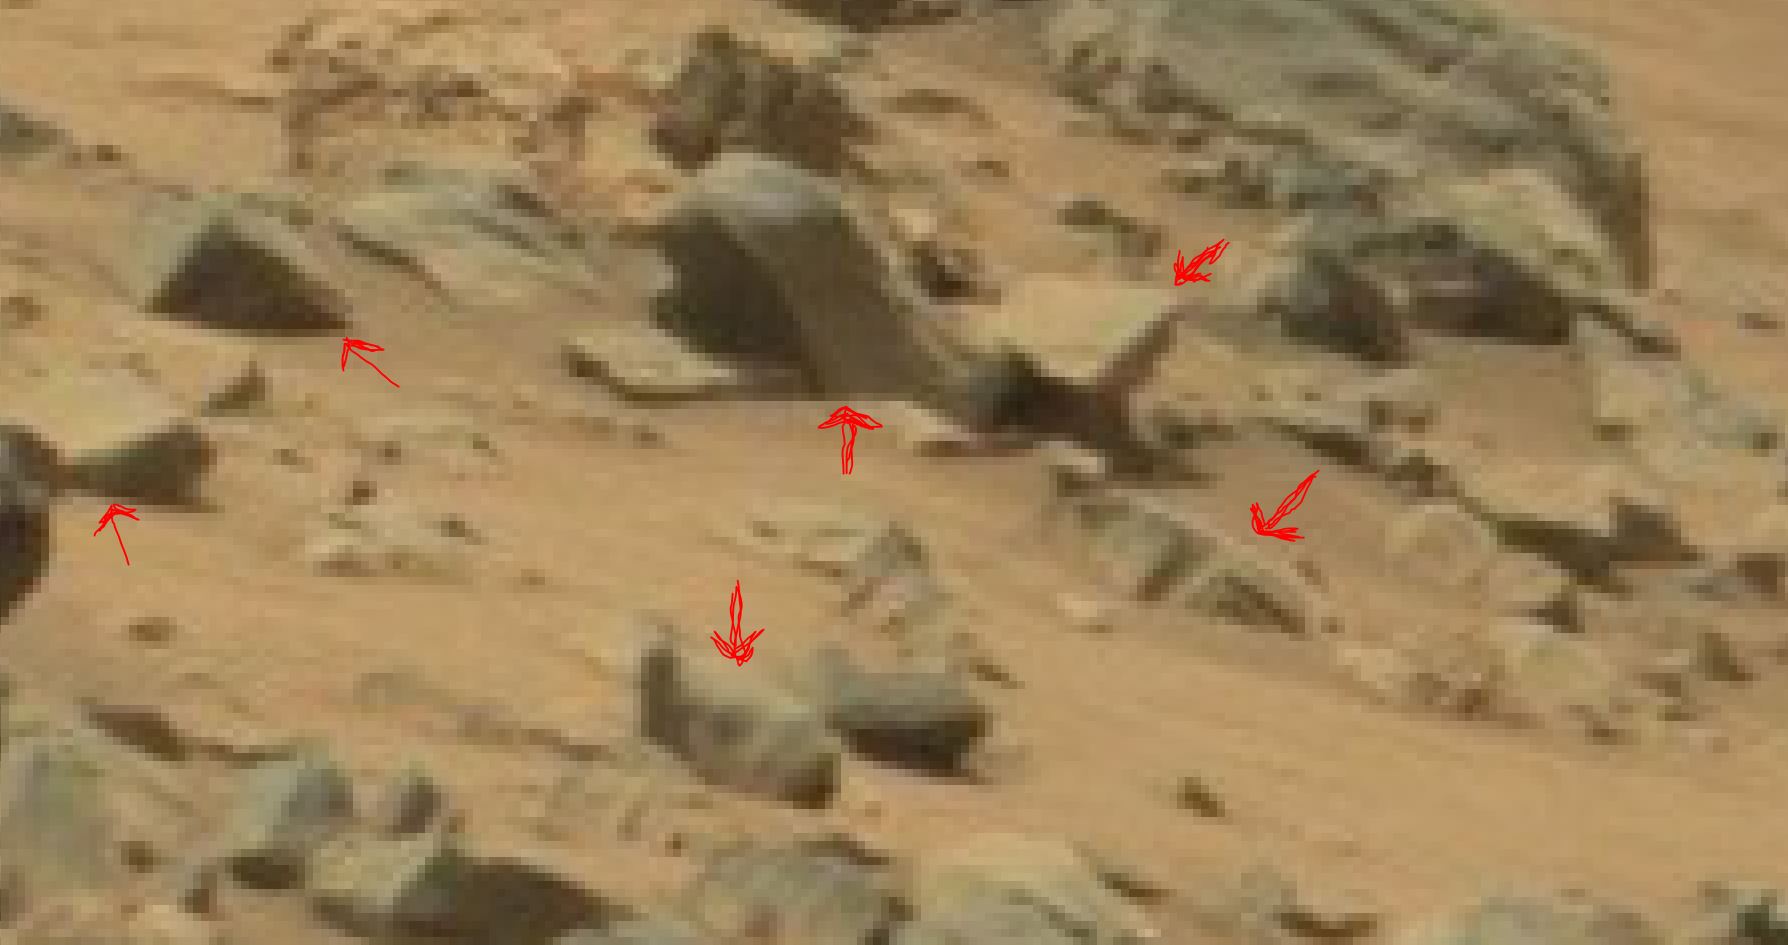 Sol-710-mars-rover-artifacts-harry-23